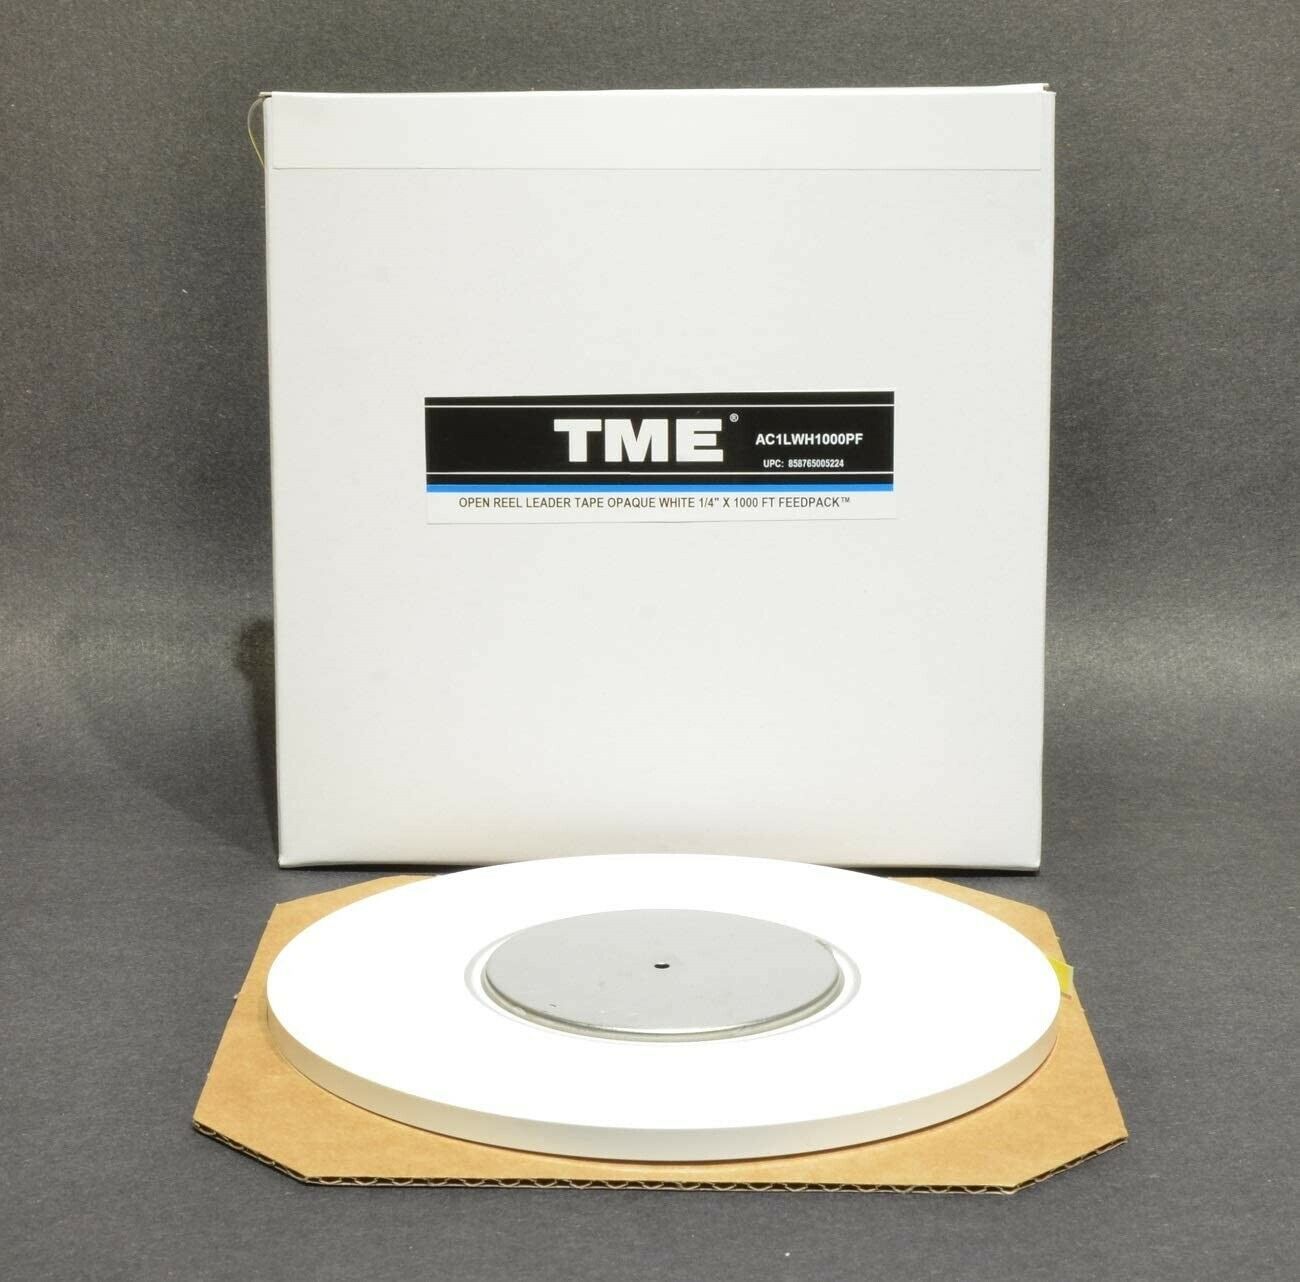 Open Reel Audio Leader Tape Solid White 1/4 X 1000 Ft or 500 Ft Feedpack  Pancake by TME – US Recording Media, LLC